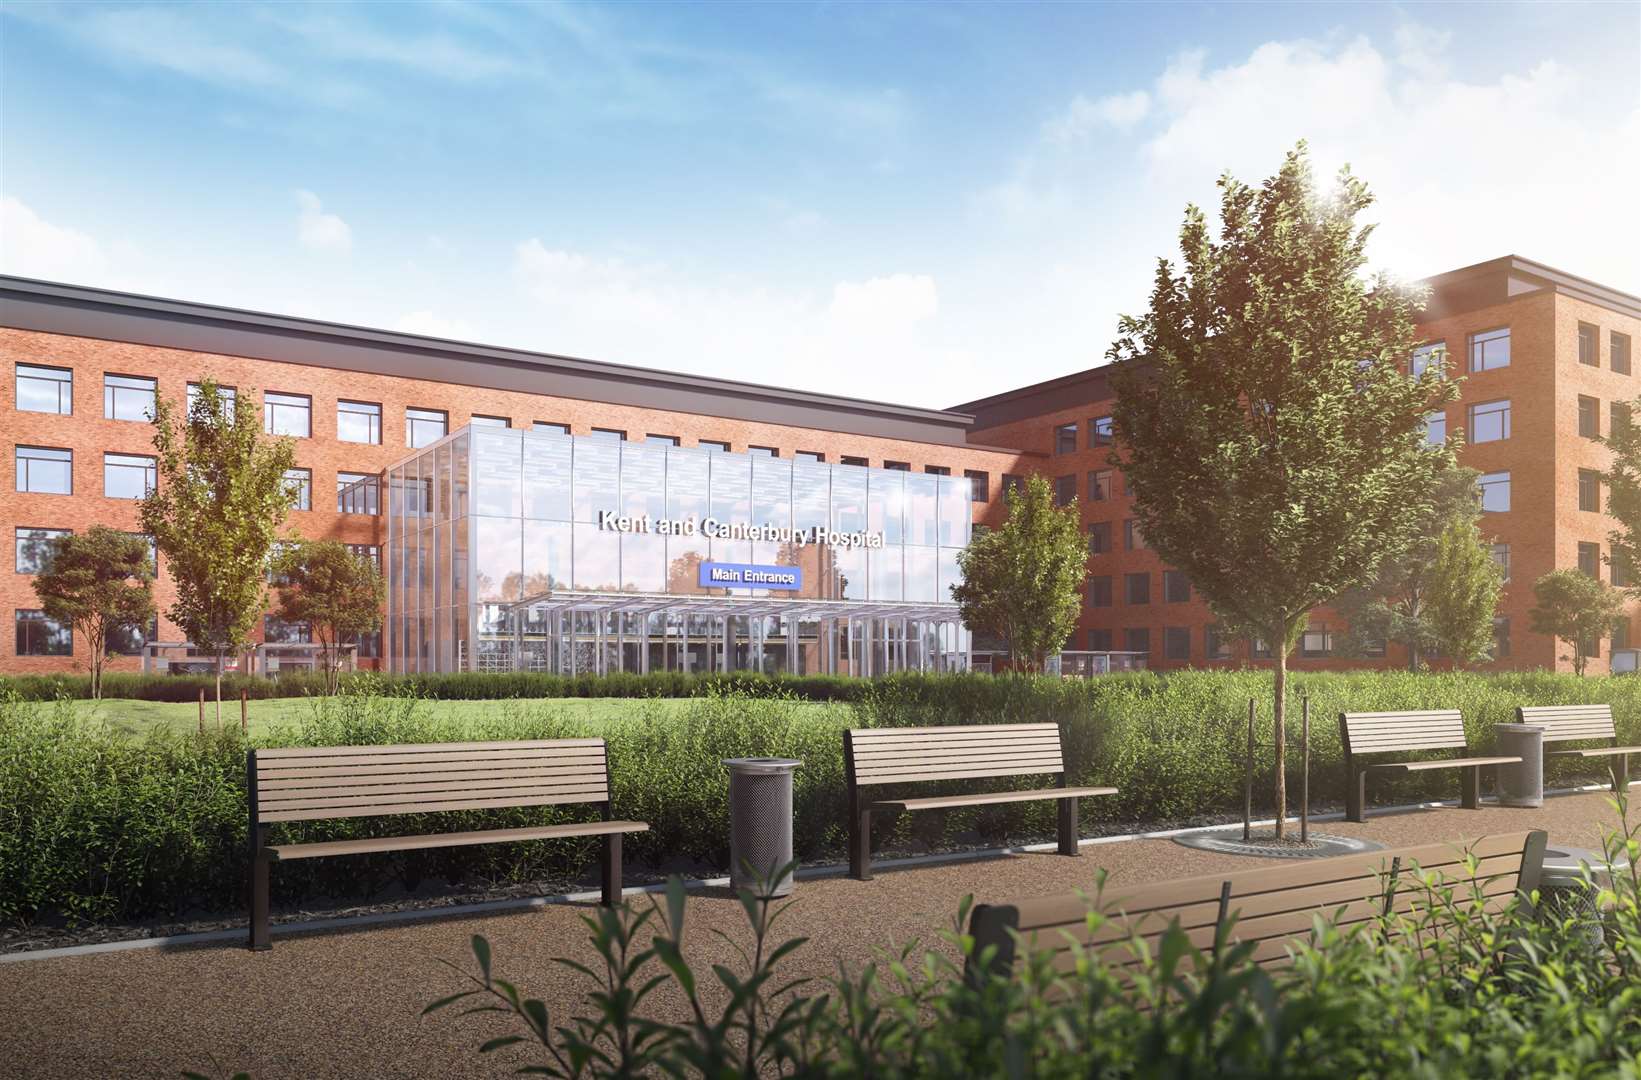 A CGI of the proposed new super hospital for Canterbury – which has been snubbed after East Kent Hospitals Trust was denied £460m funding from the government